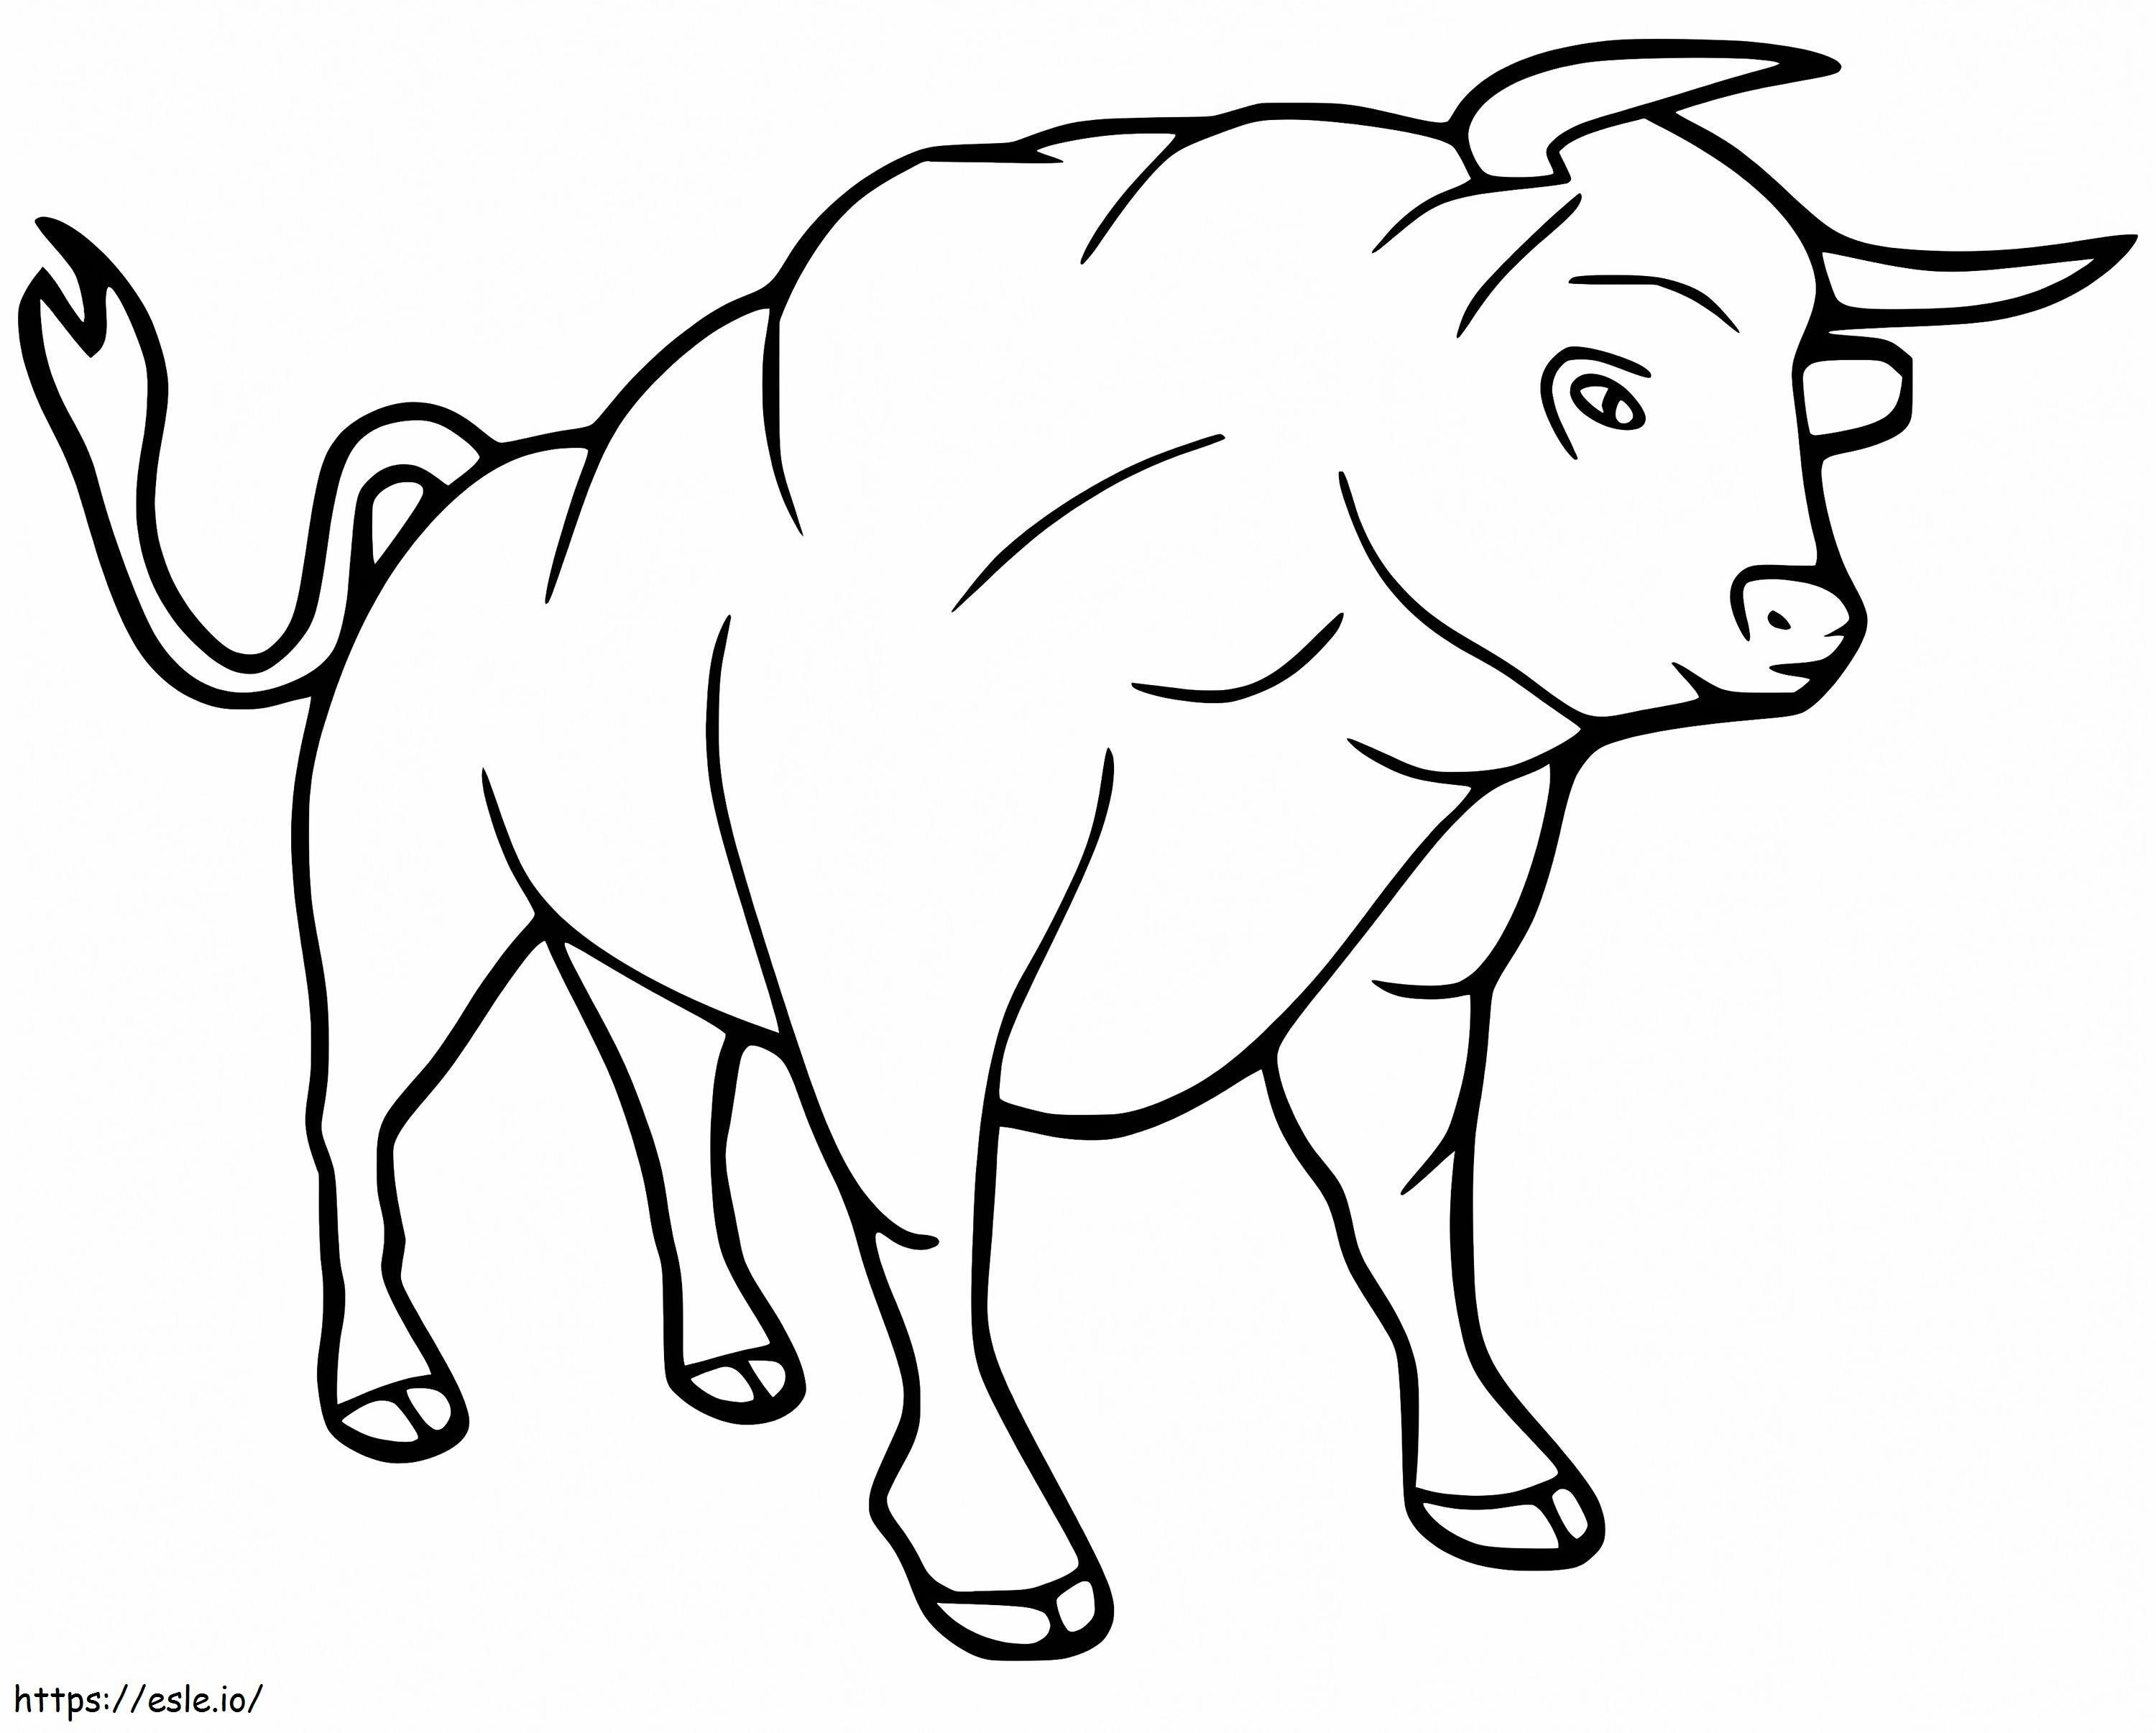 Strong Bull coloring page